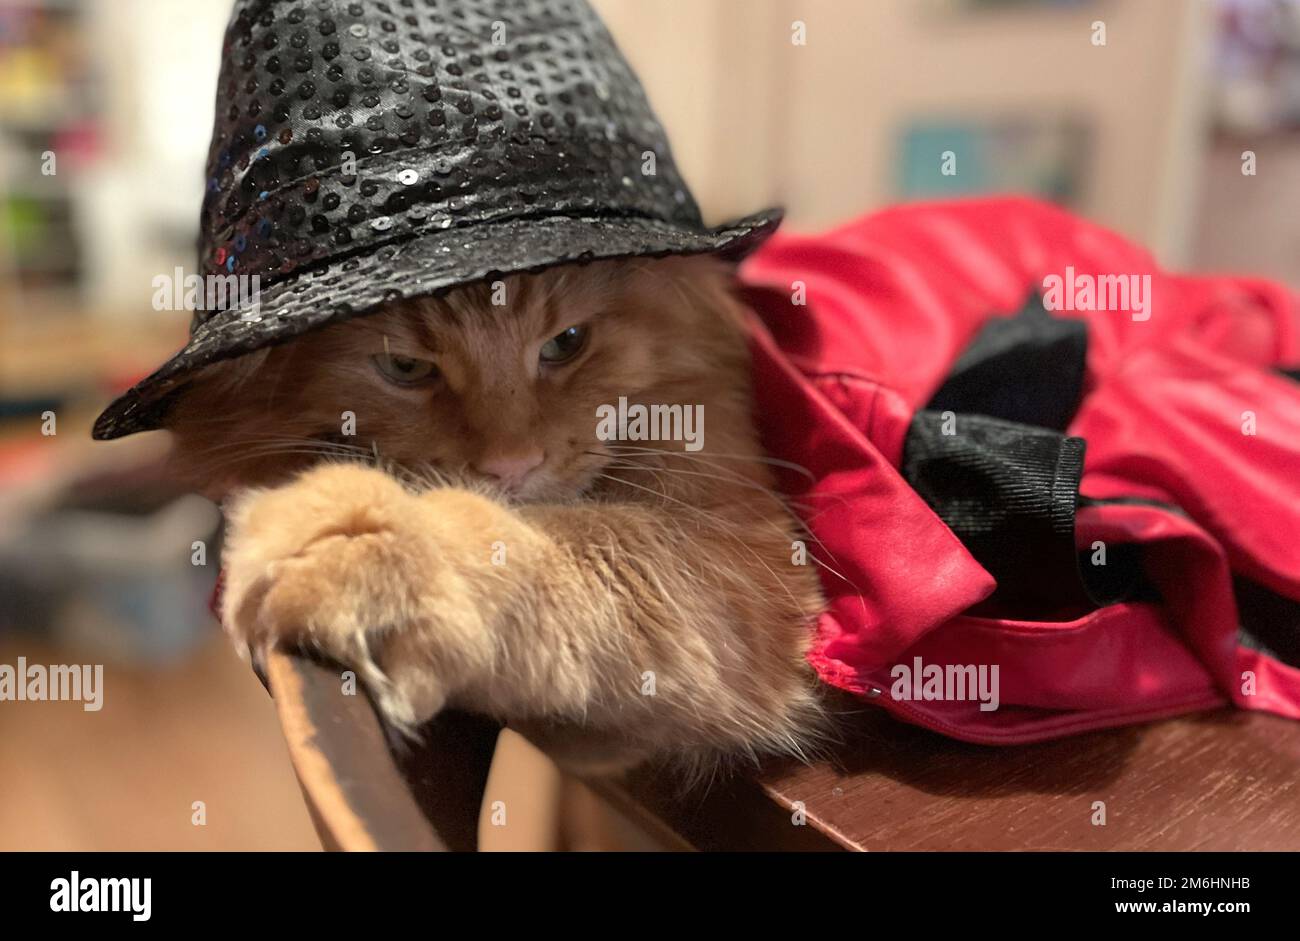 Cat wearing coat Stock Photo by ©willeecole 19448595